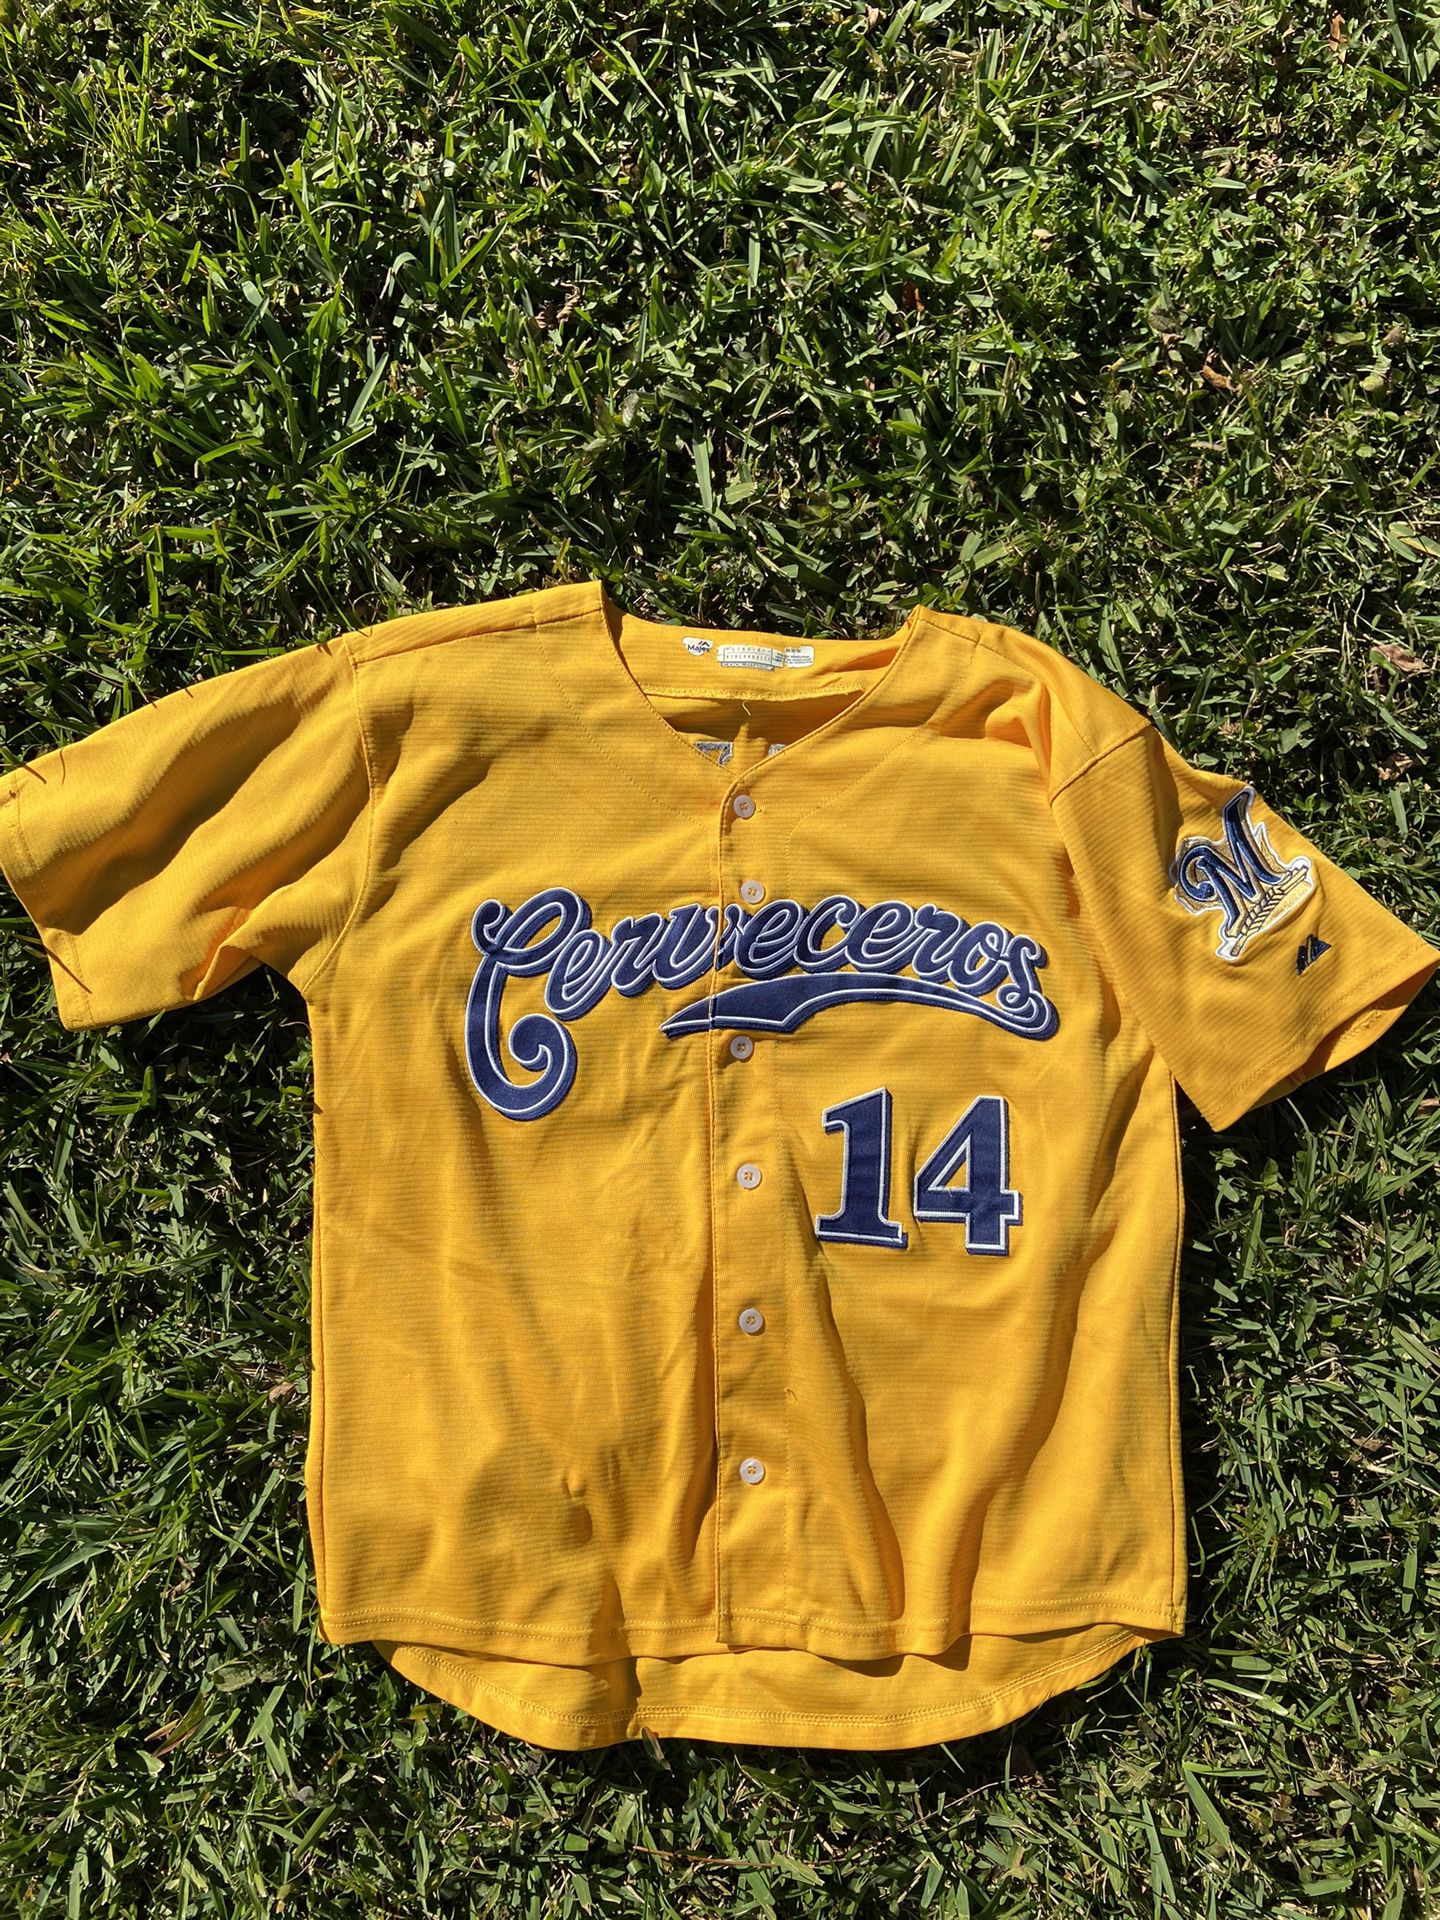 Milwaukee Brewers ‘Cerveceros’ MLB Jersey for Sale in No Fort Myers, FL -  OfferUp